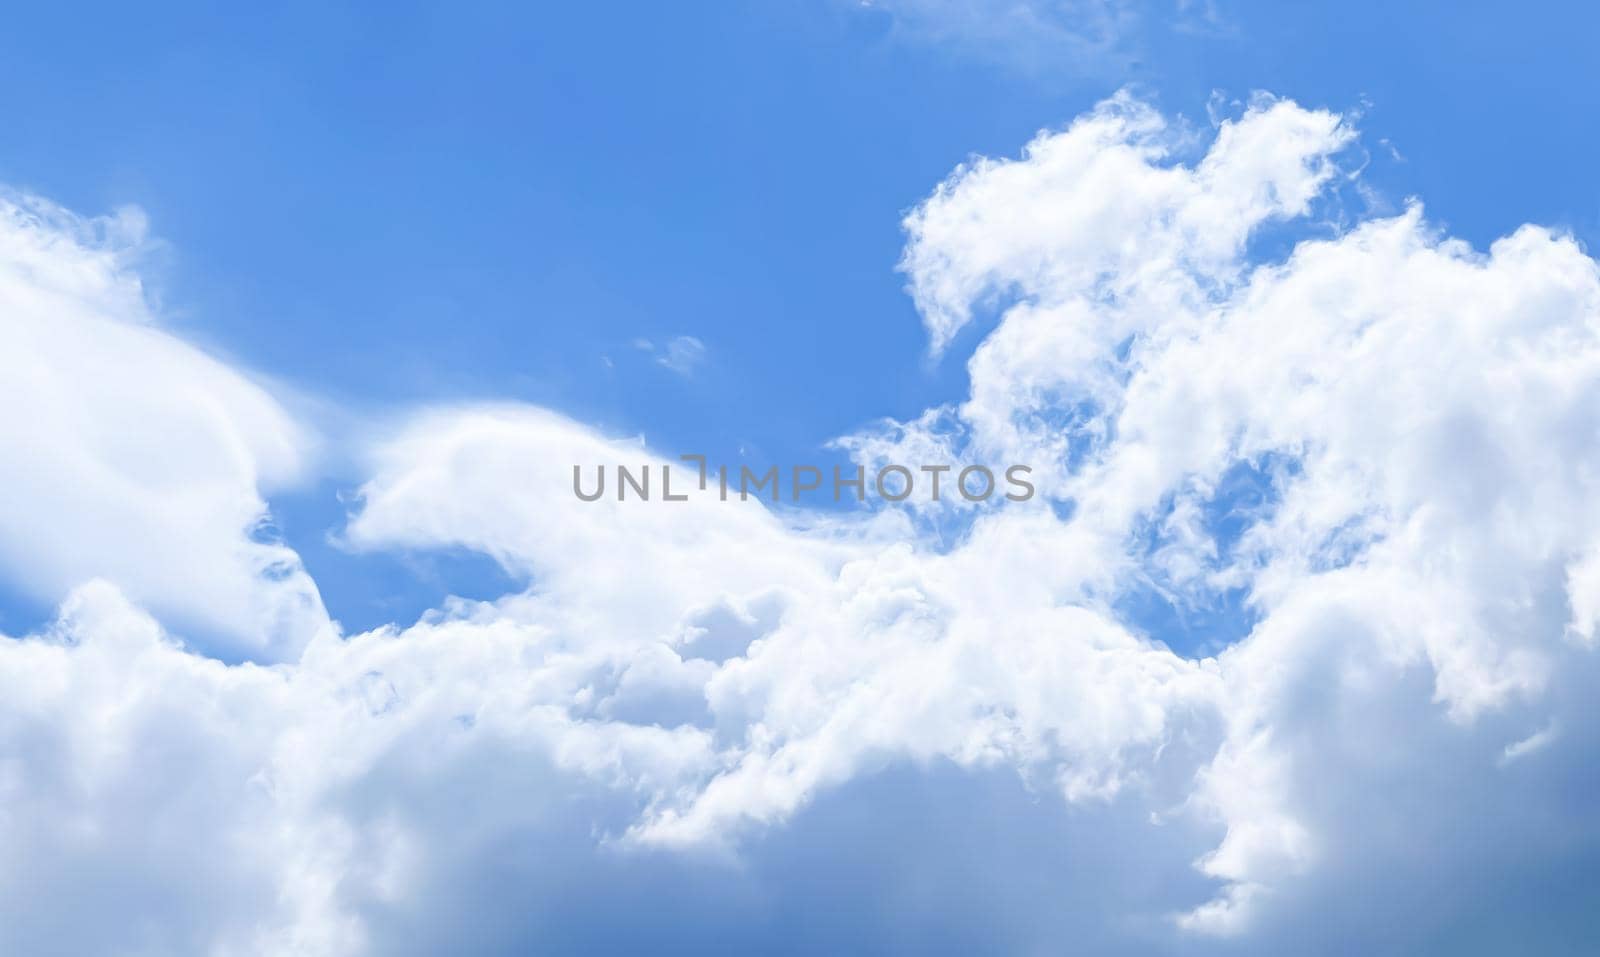 Cloudy sunny sky as abstract background, bright colours, beauty in nature concept